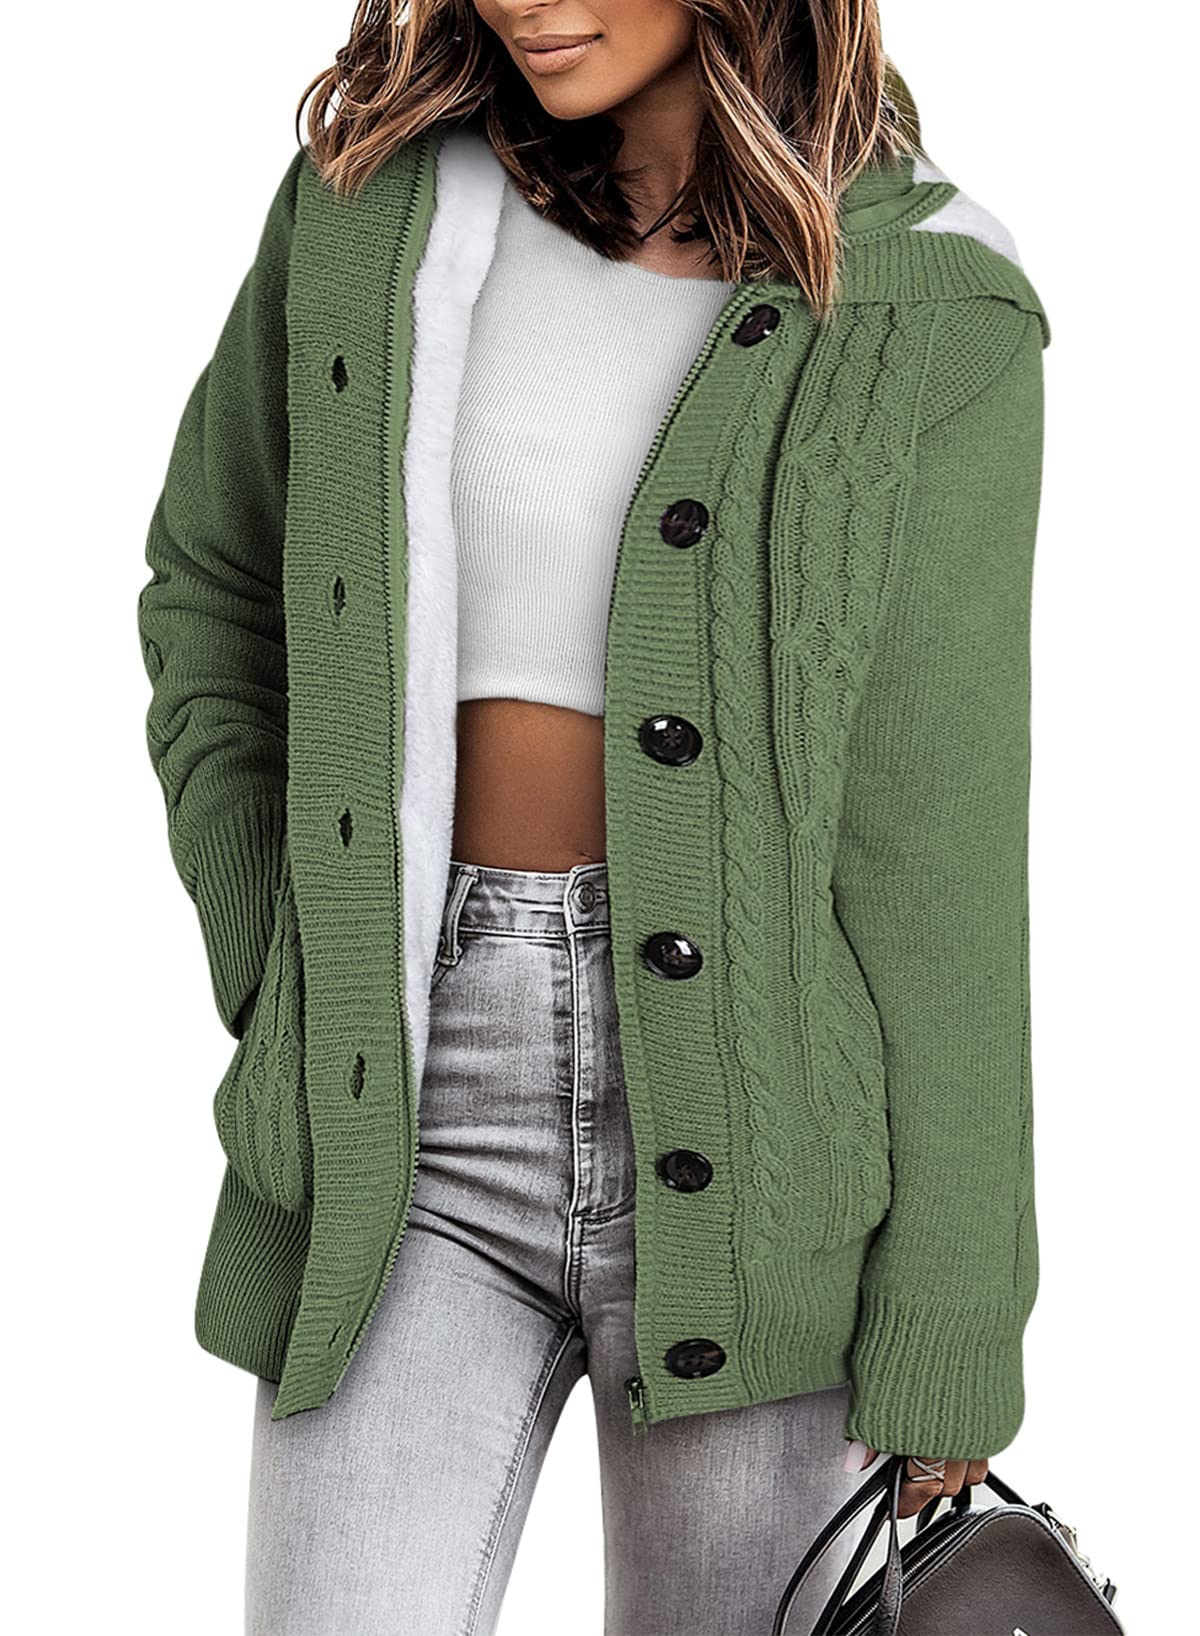 Sidefeel Women Hooded Knit Cardigans Button Cable Sweater Coat Small Light Green